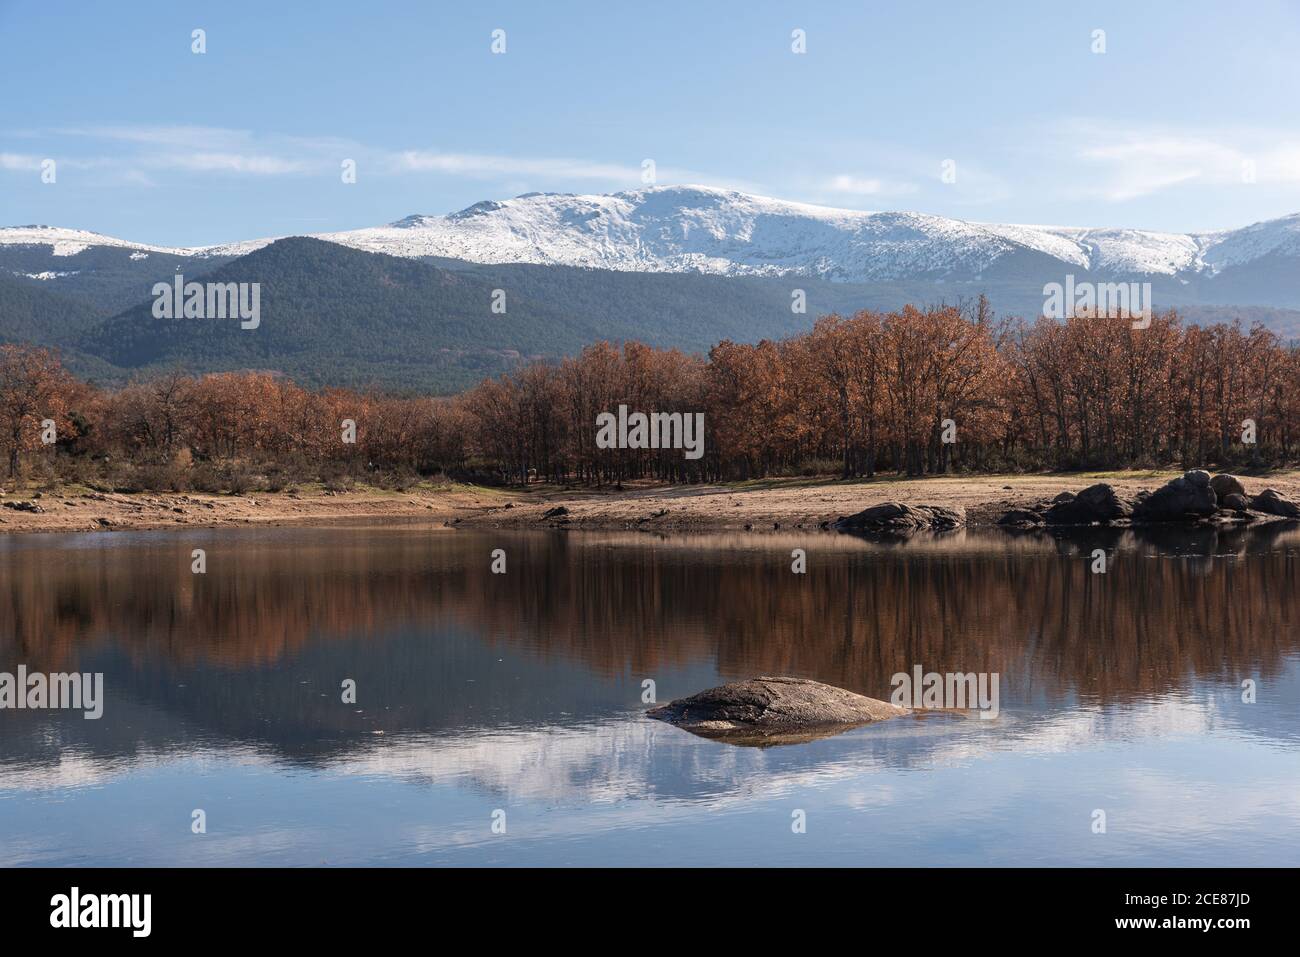 Shore of calm river against snowy autumn mountain ridge and cloudy sky in nature Stock Photo